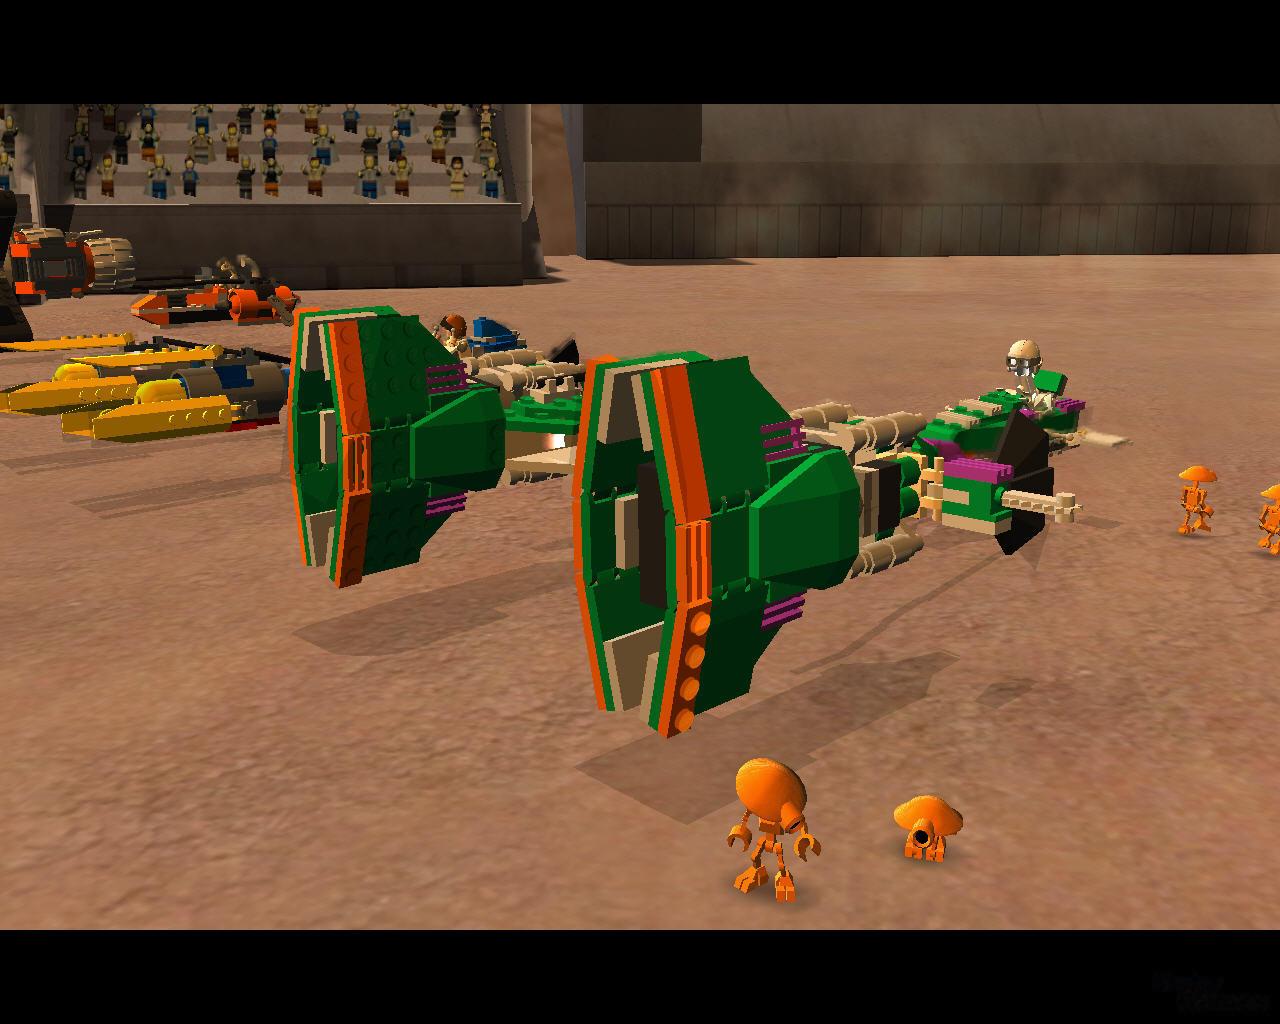 lego star wars games free play online